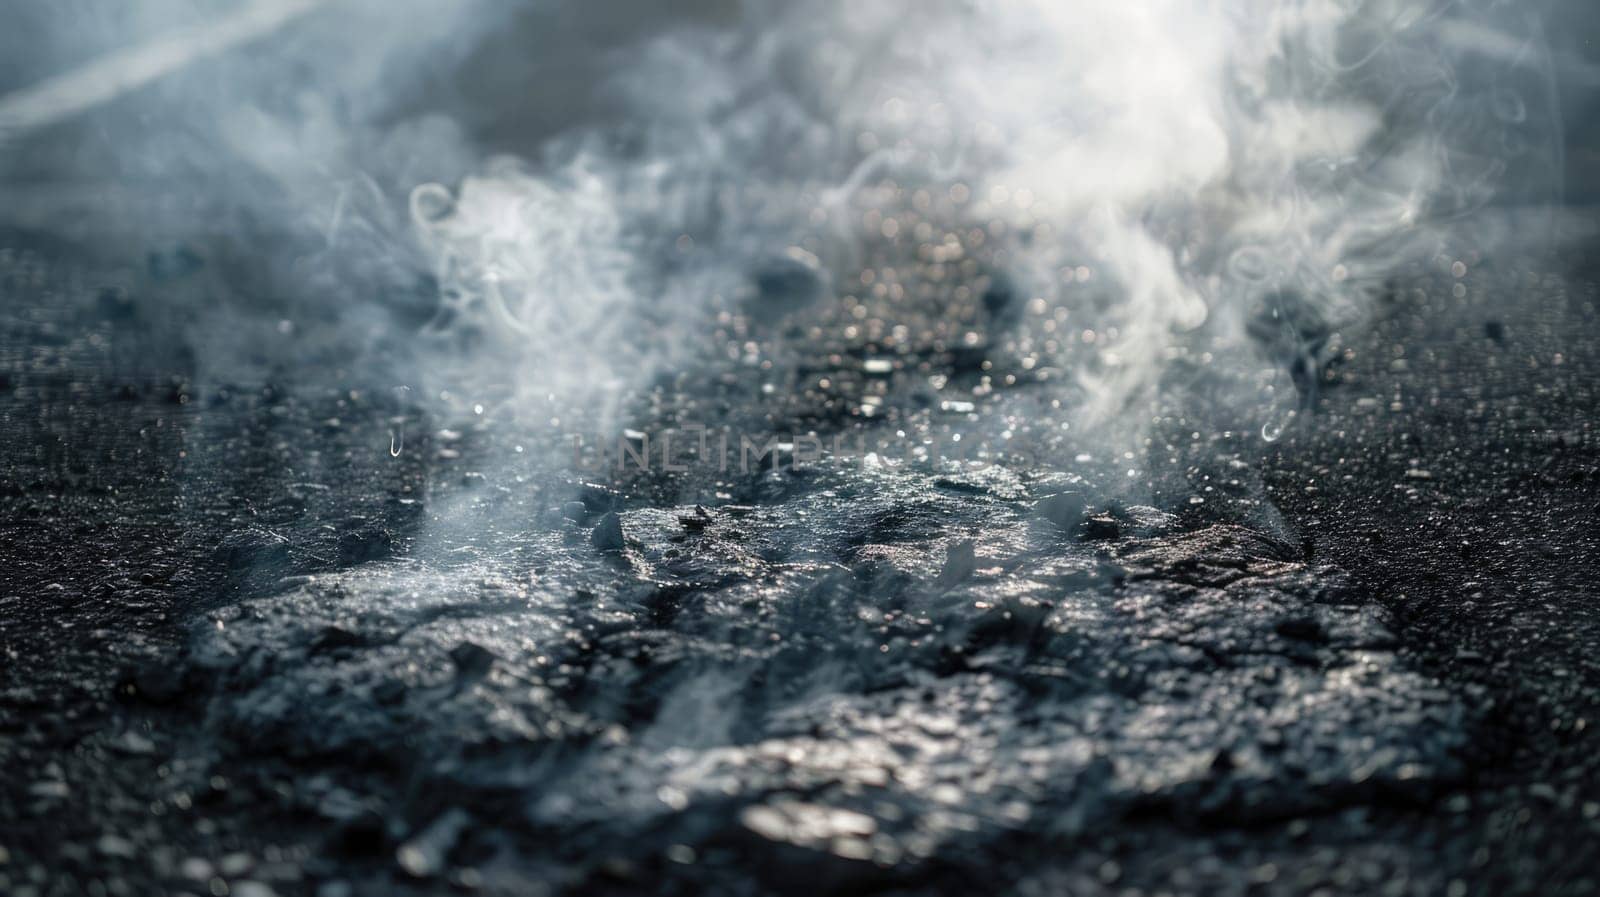 Asphalt smokes from high temperature and heat by natali_brill